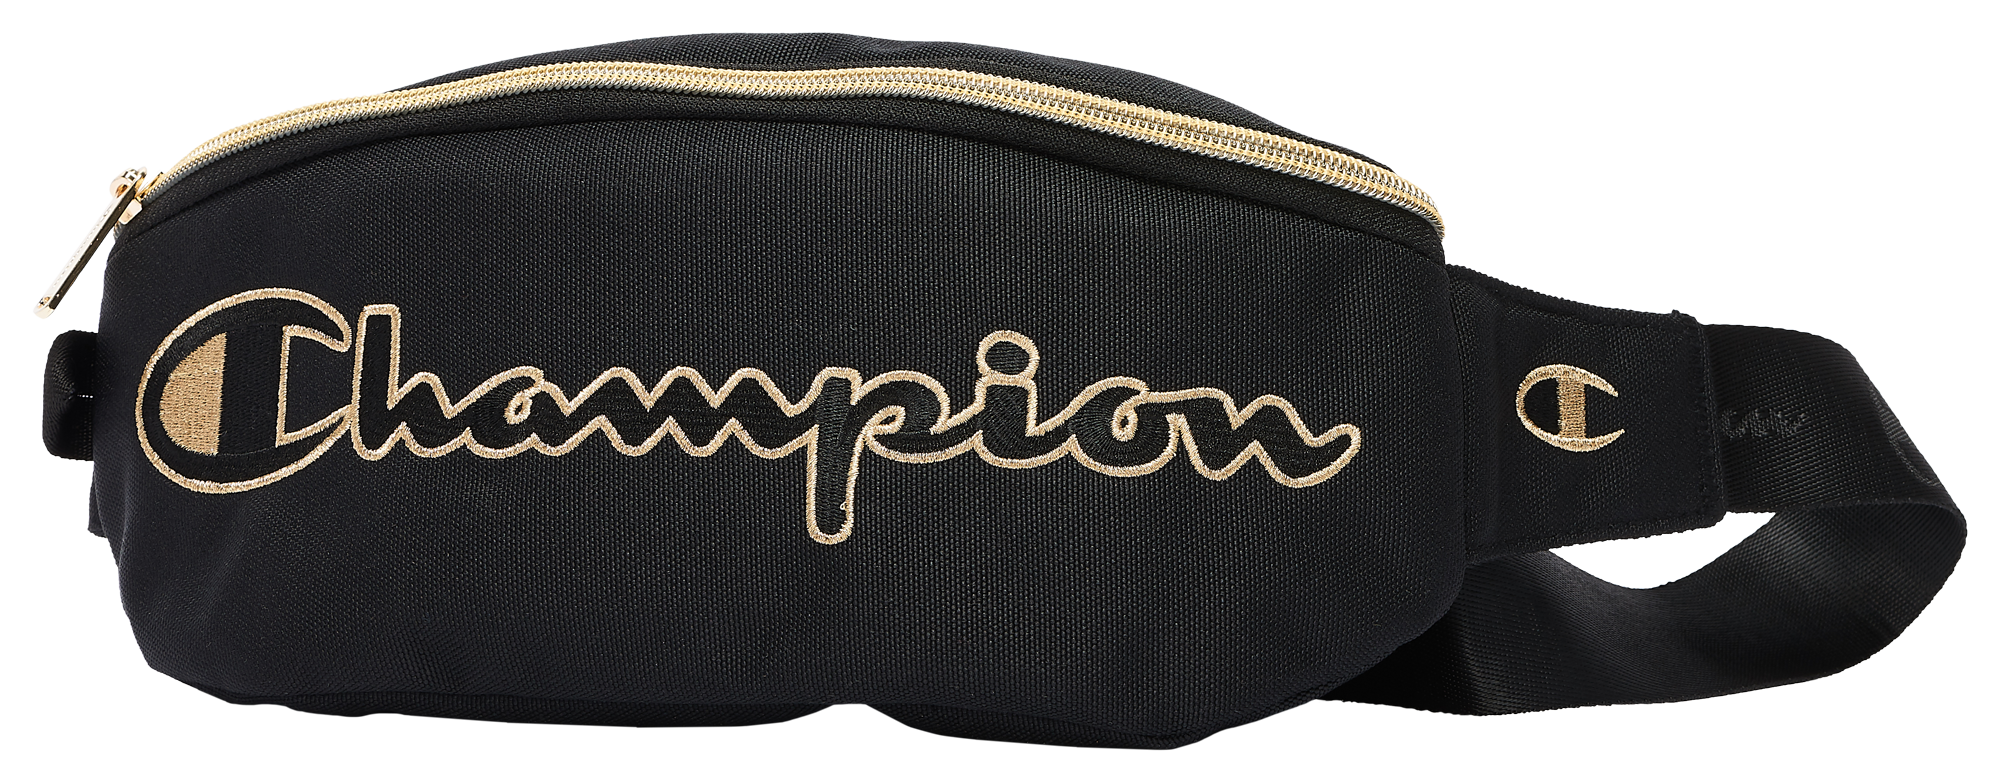 Champion Bags | Eastbay